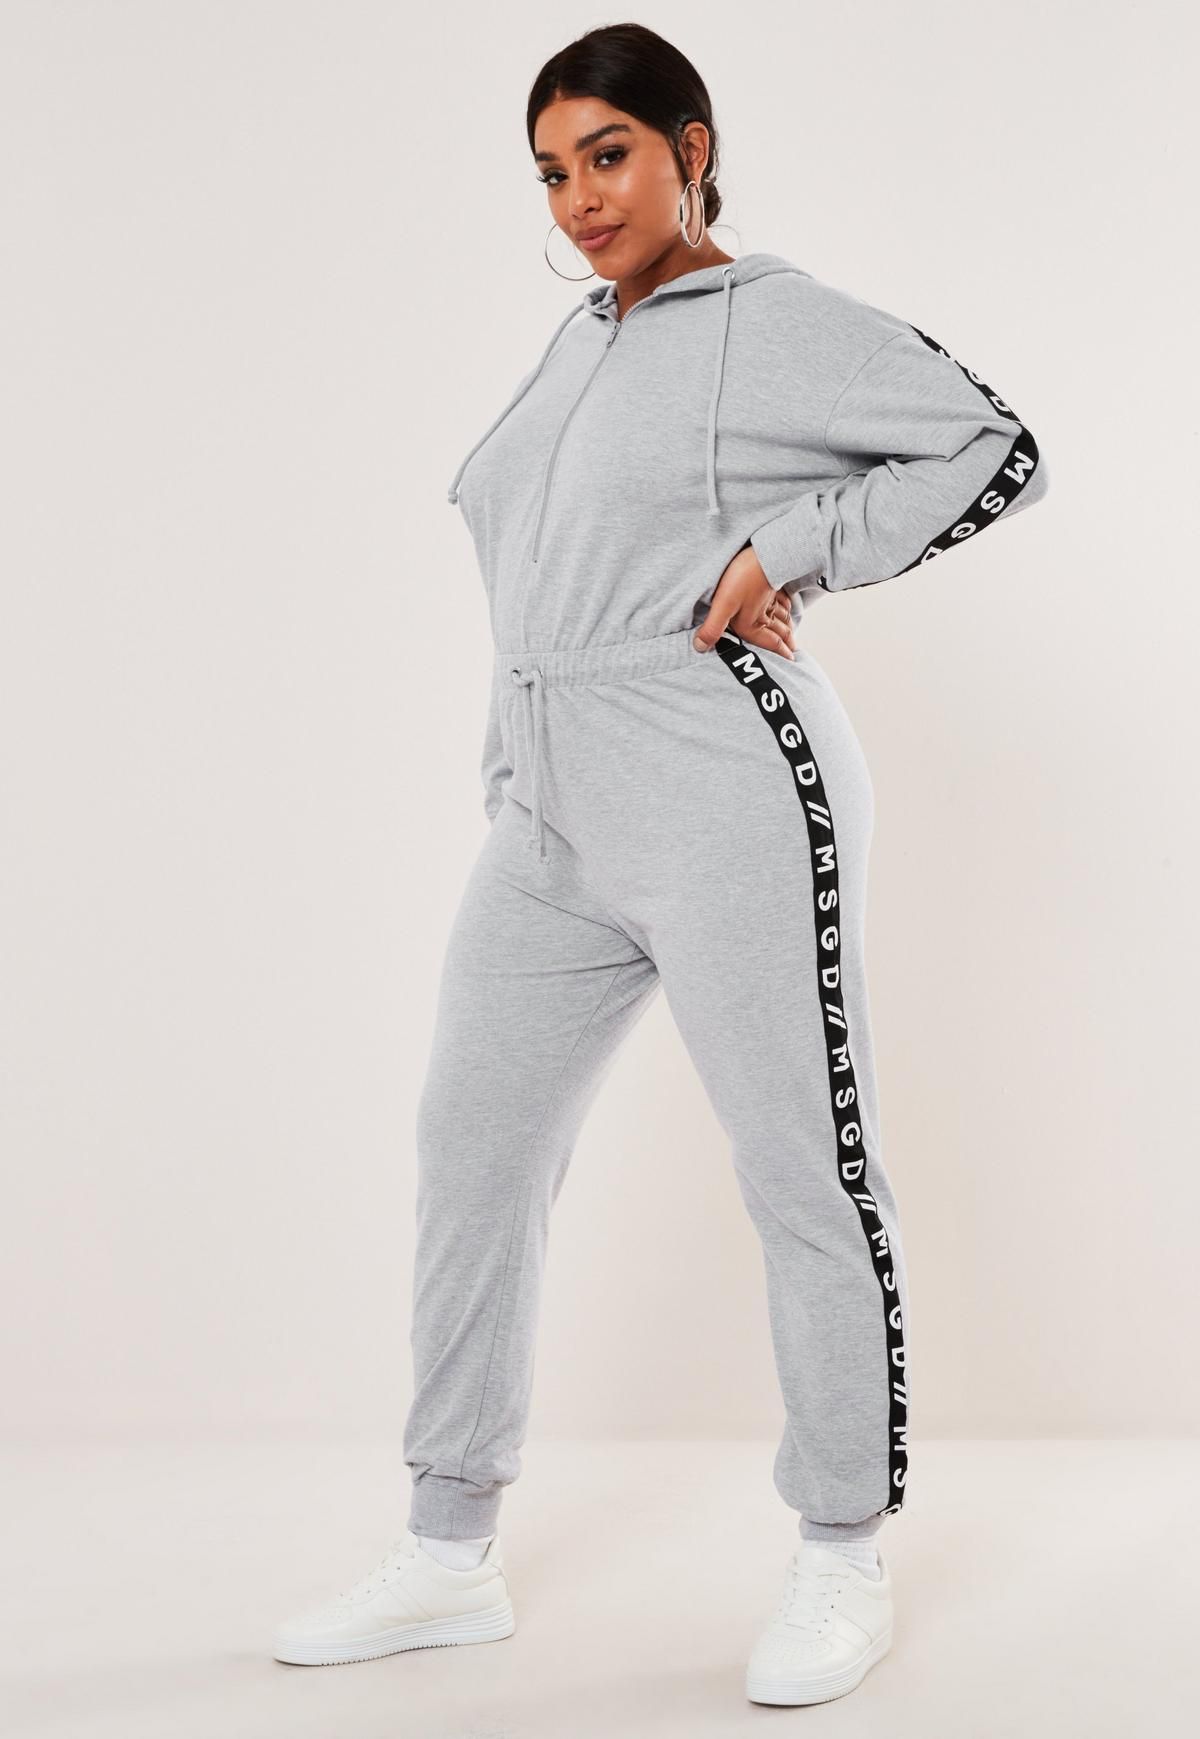 Womens tracksuits - 15 best tracksuits 